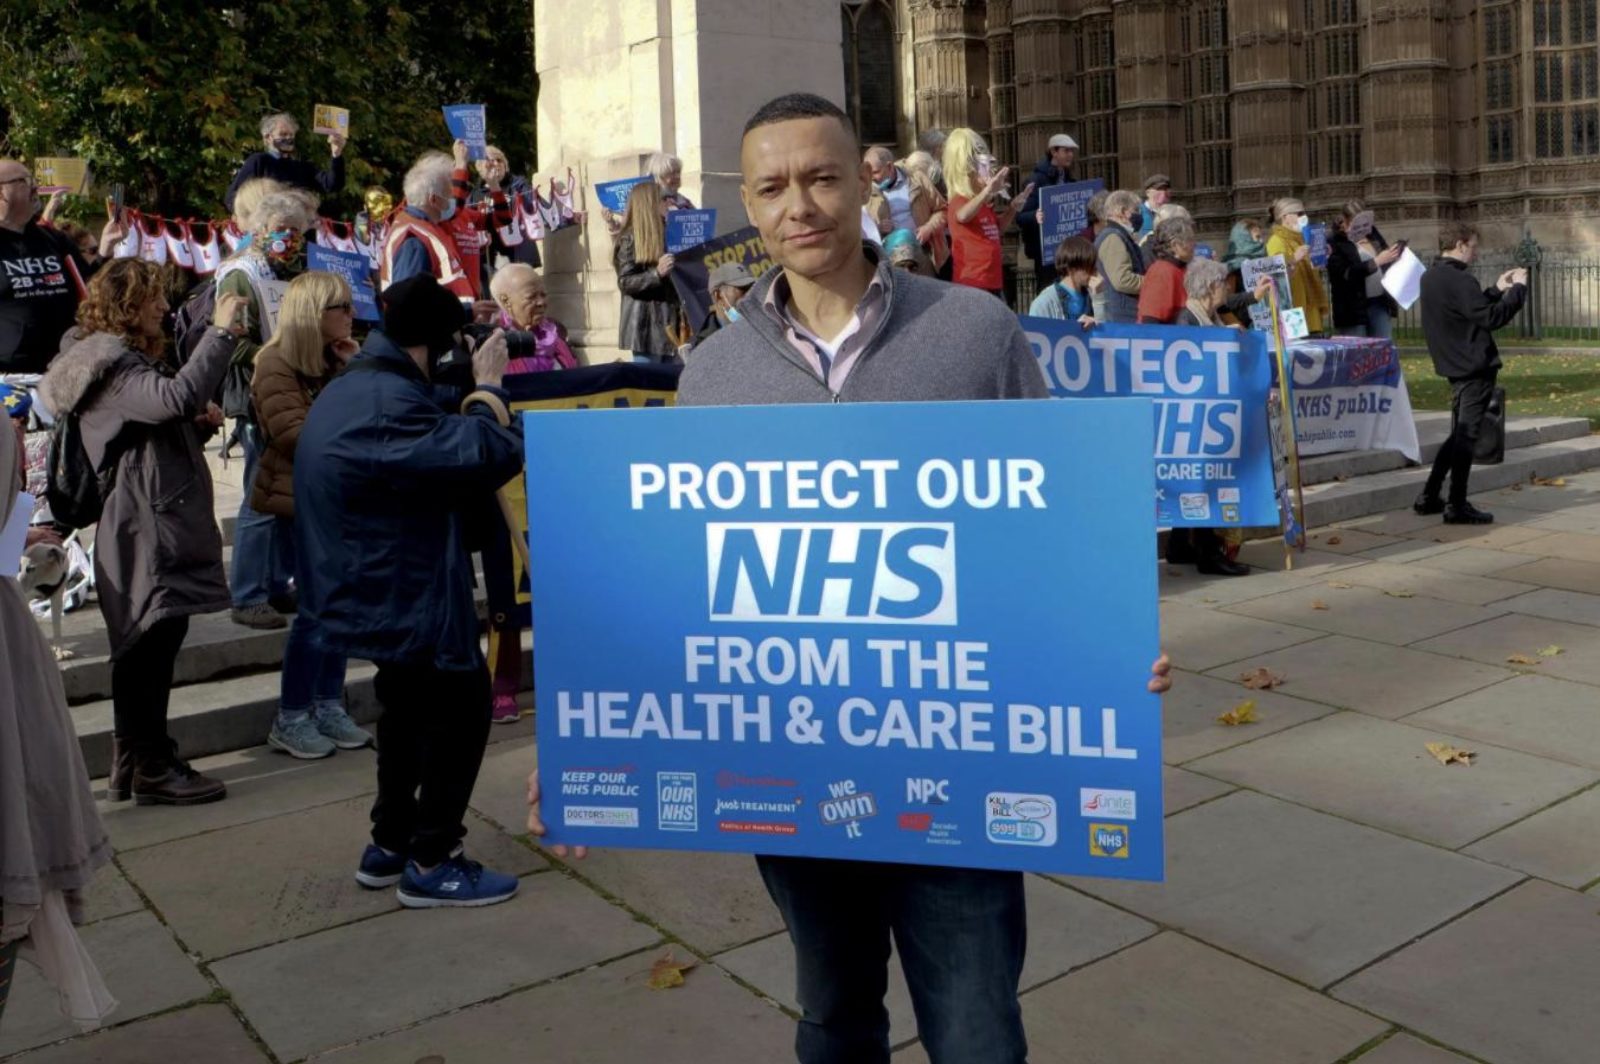 Image shows Clive holding a sign saying 